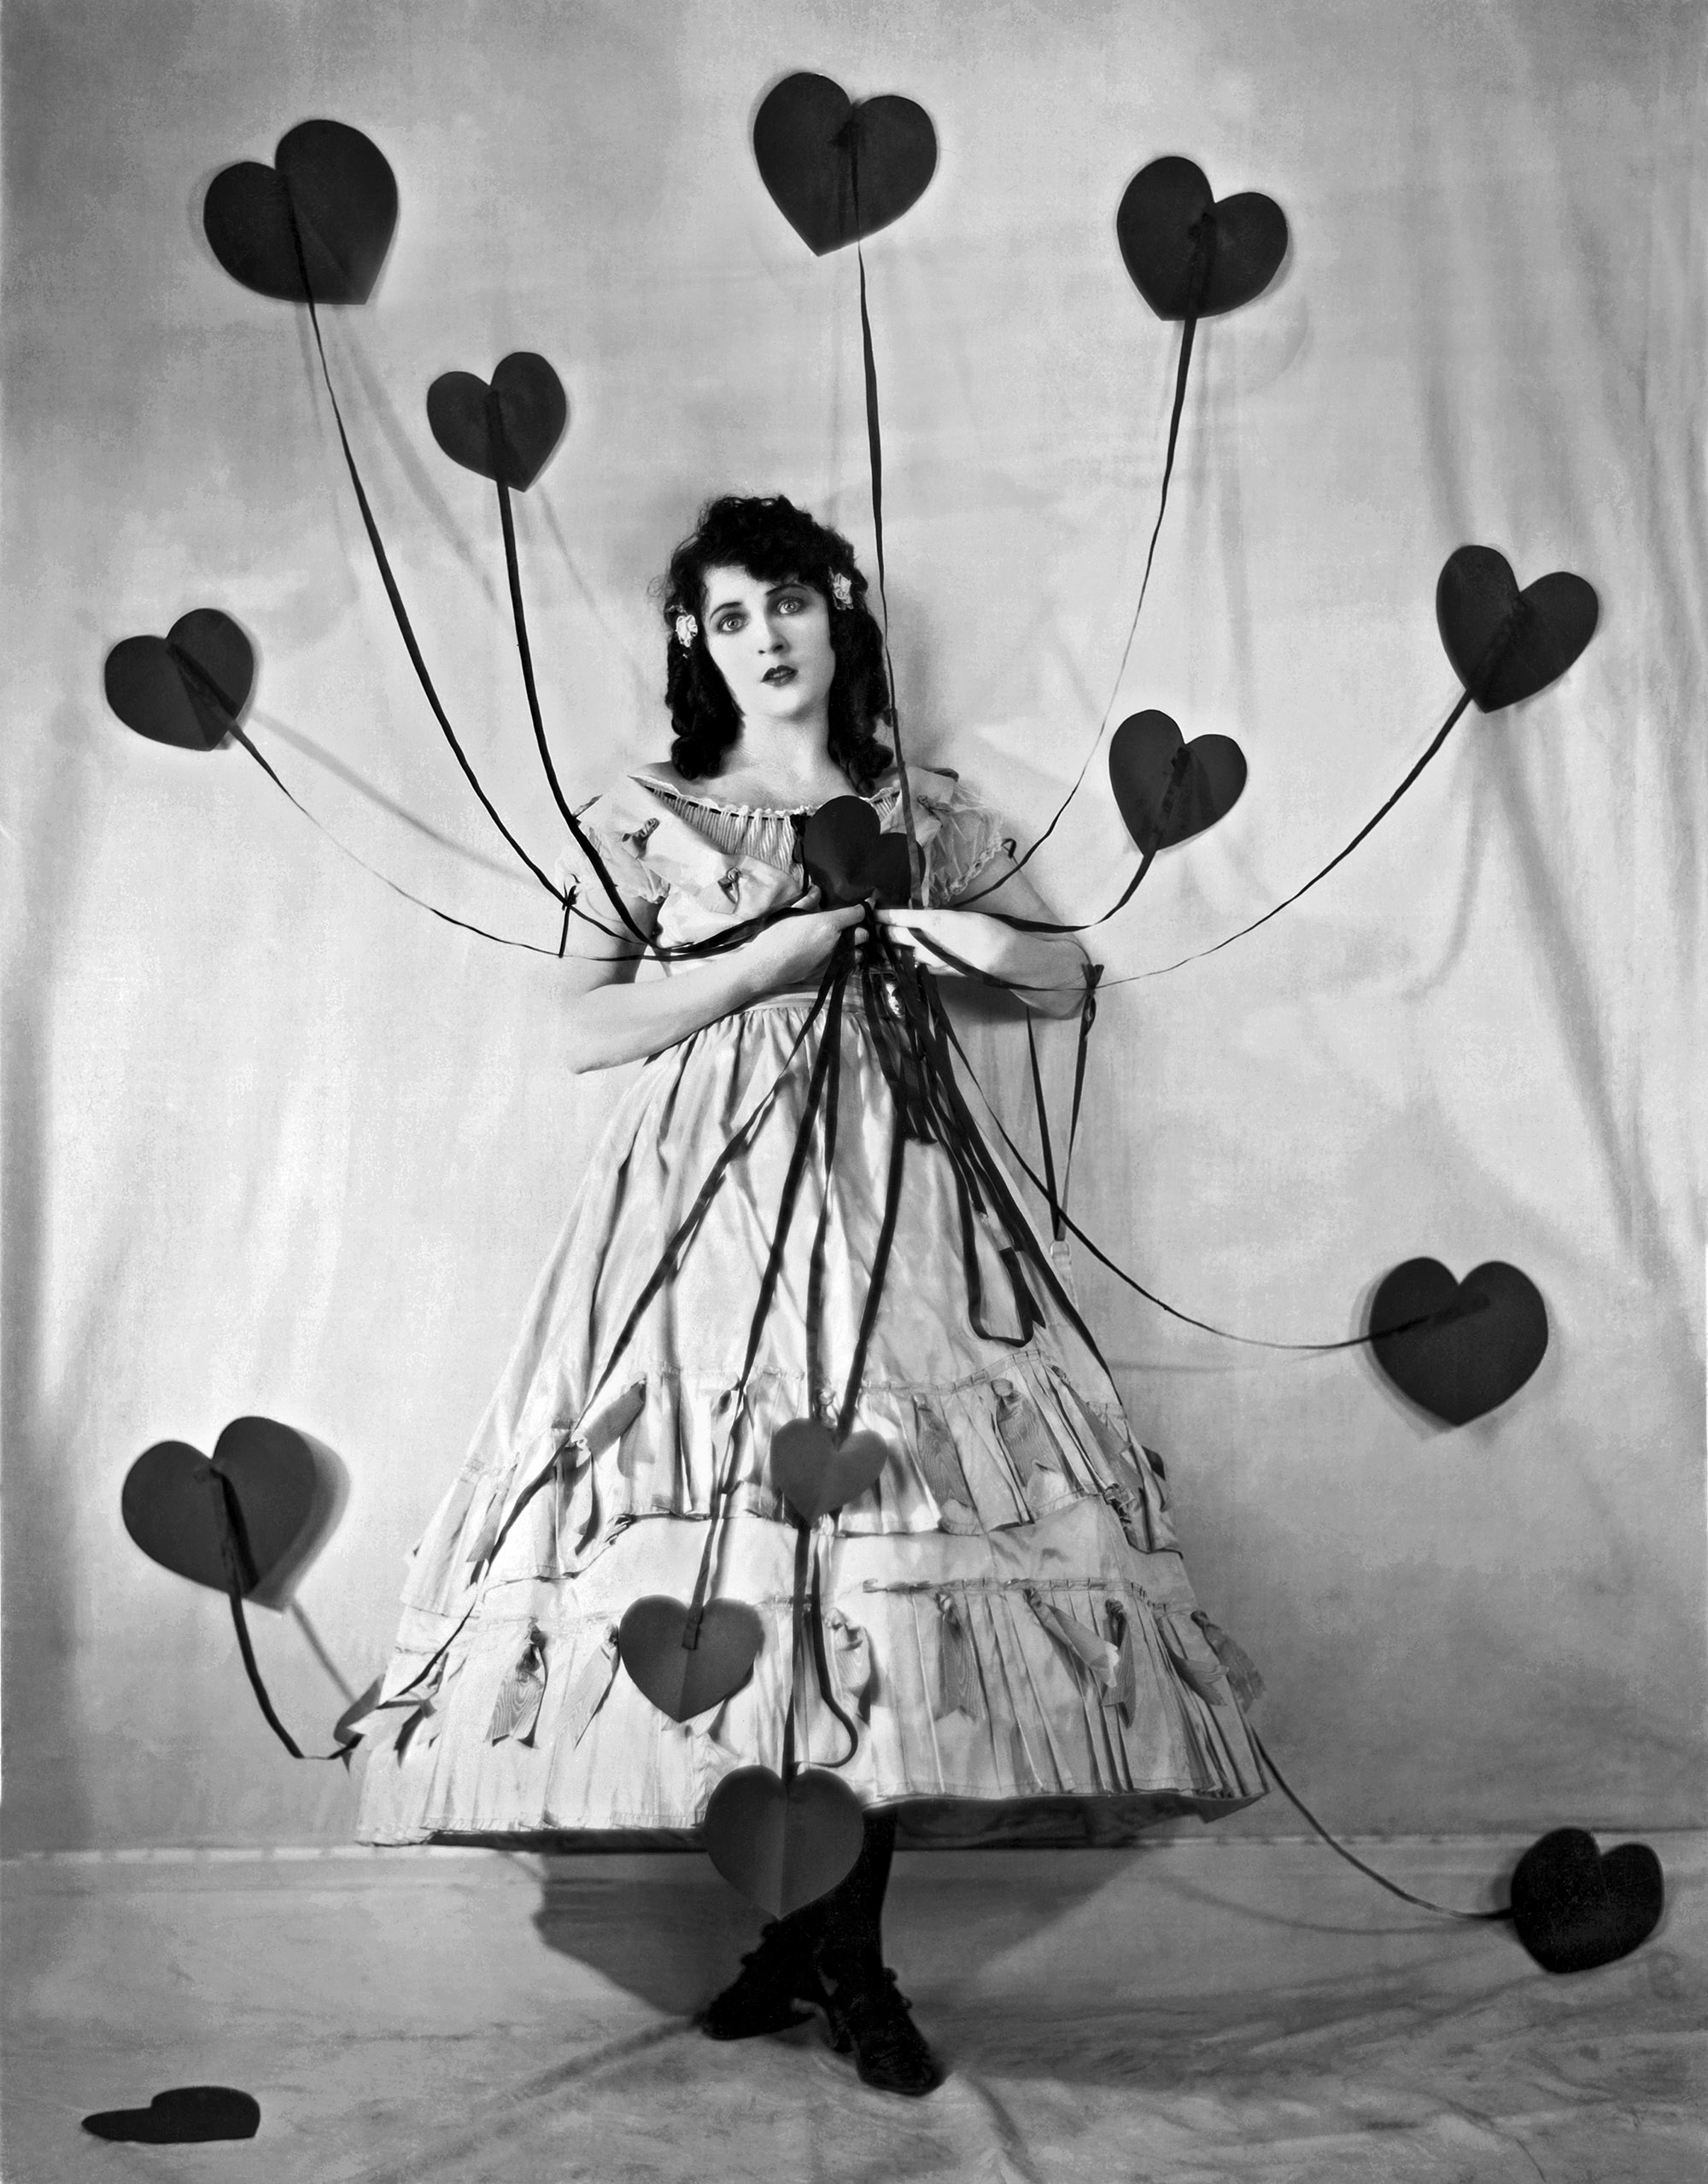 Portrait of American actress Jacqueline Logan as she poses for Valentine's Day with a number of hearts on ribbons, Hollywood, California, circa 1925.